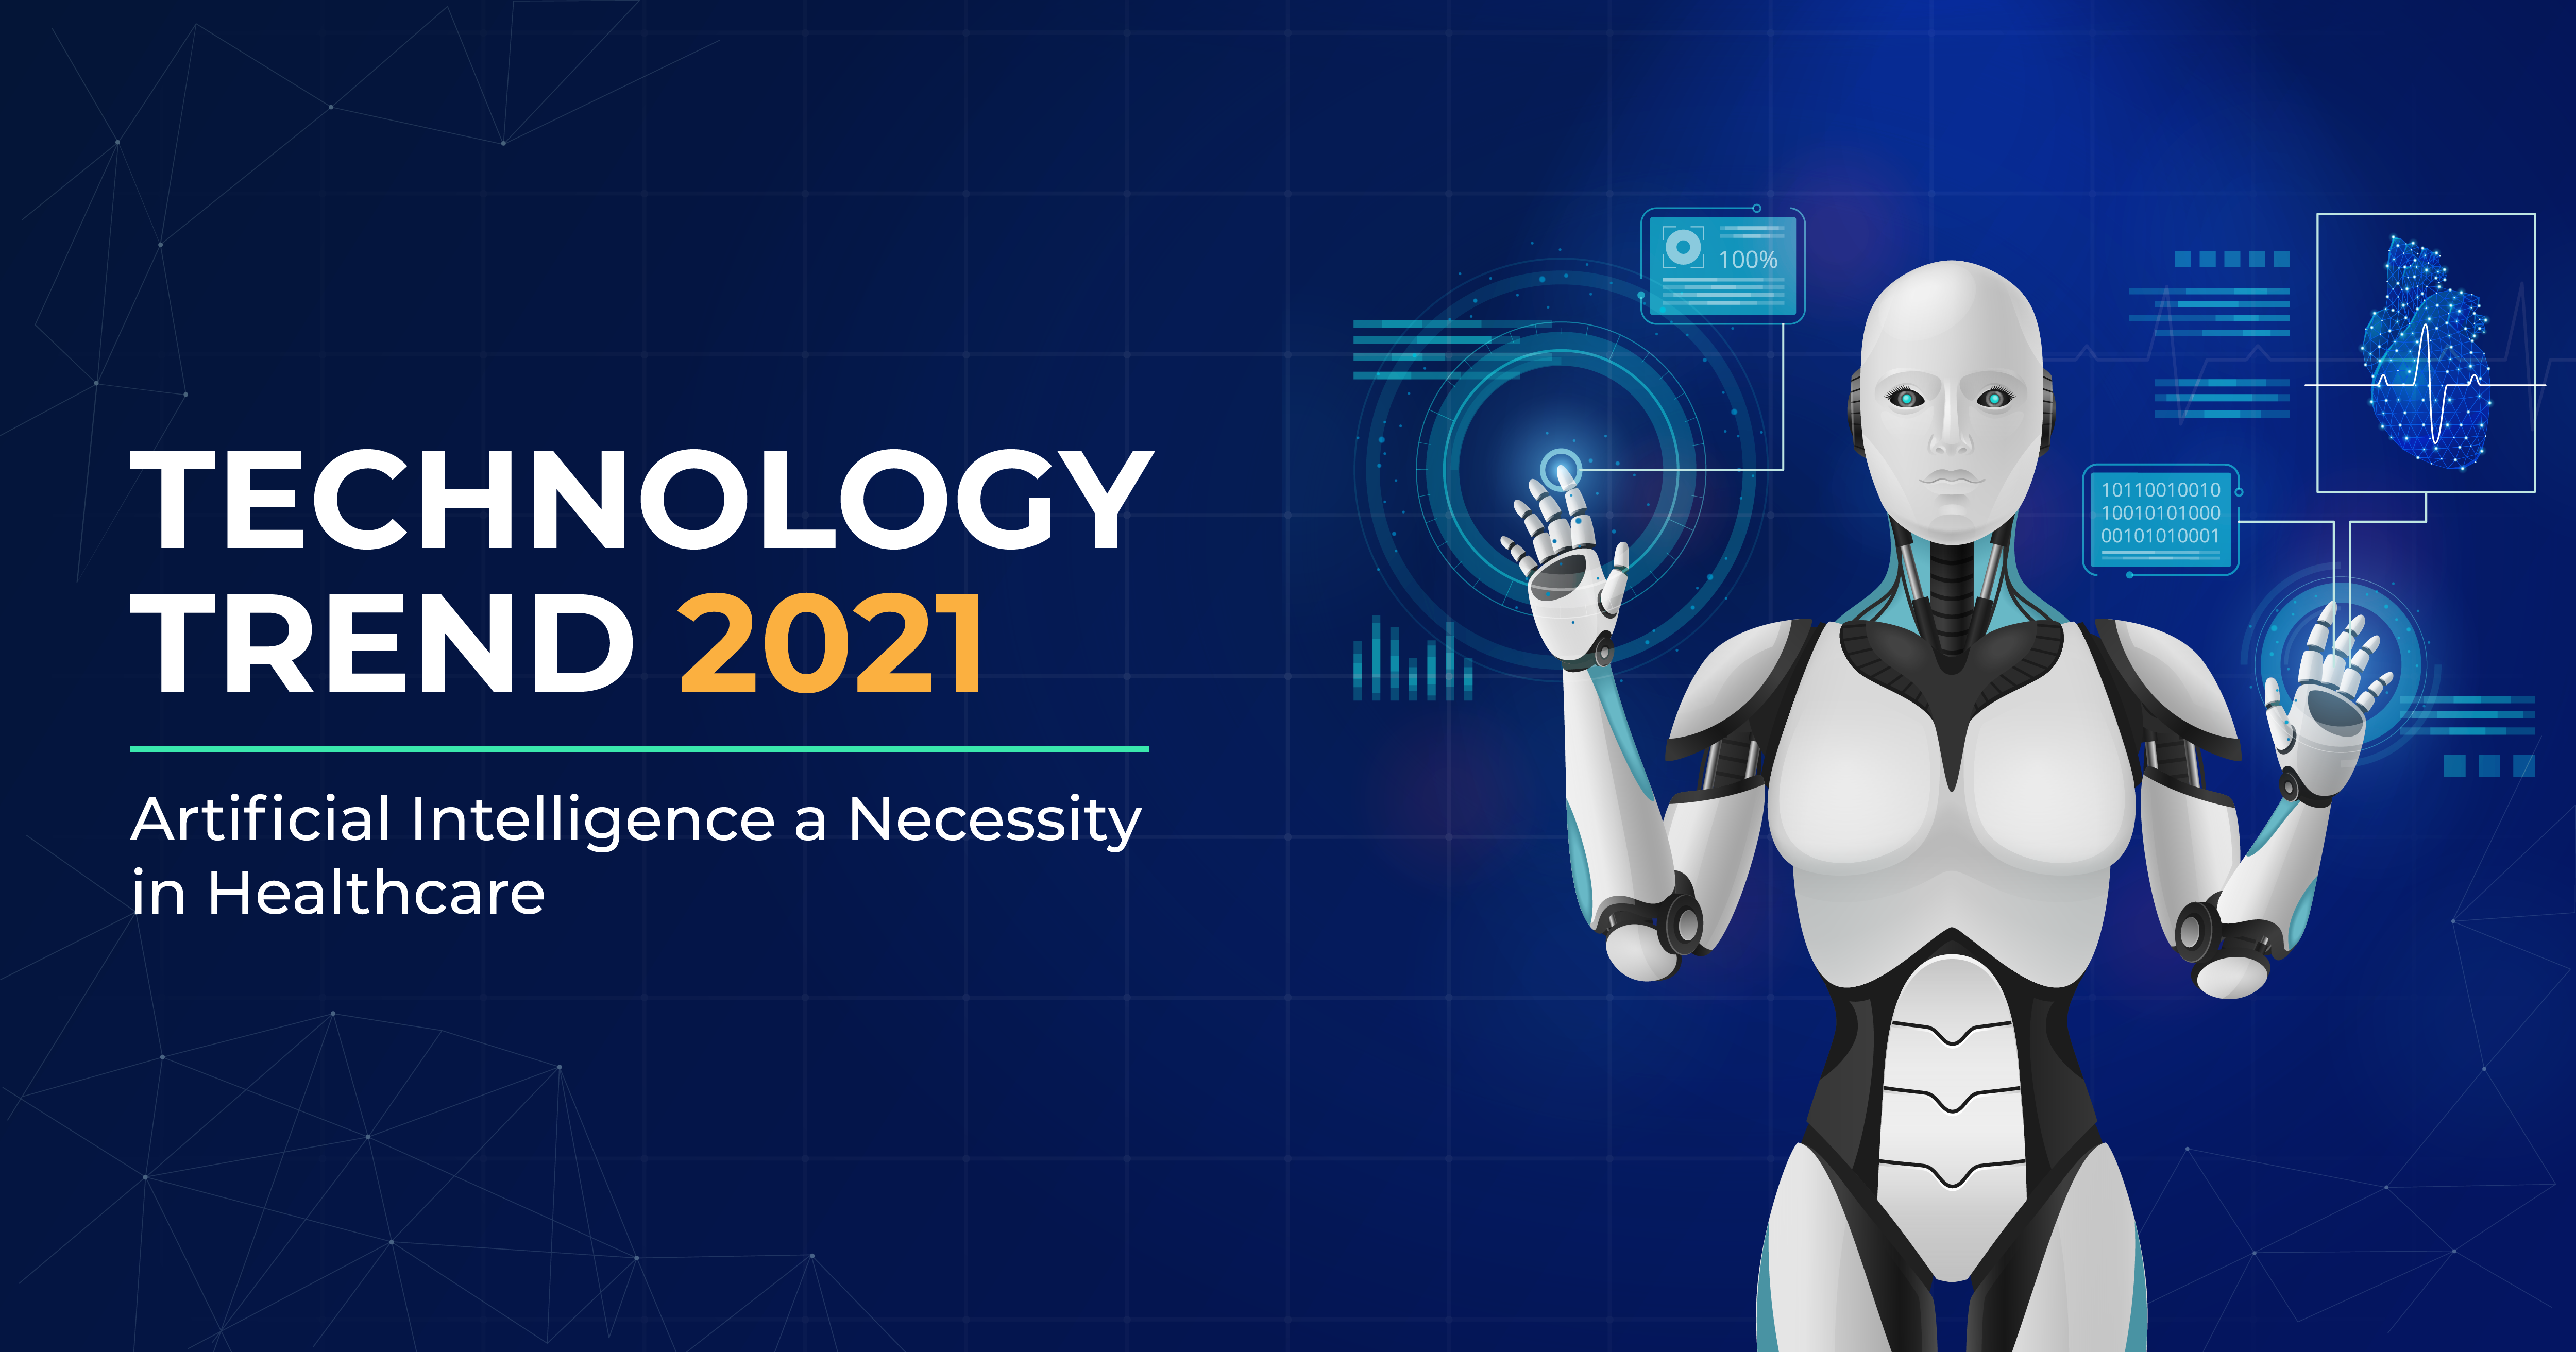 Technology Trend 2021: Artificial Intelligence a Necessity in Healthcare